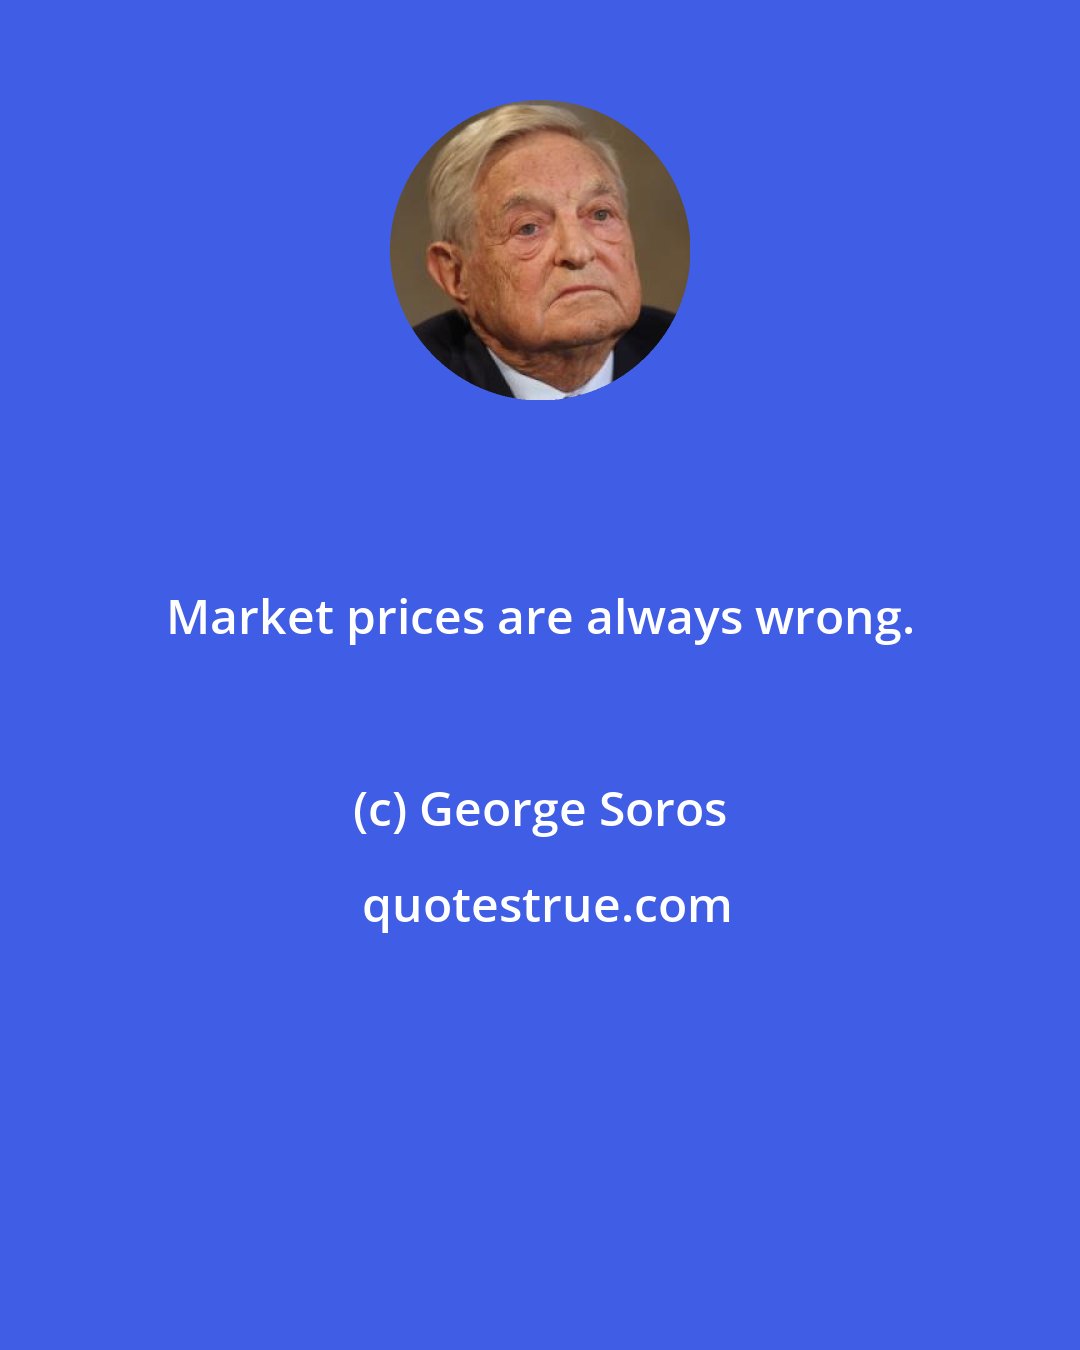 George Soros: Market prices are always wrong.